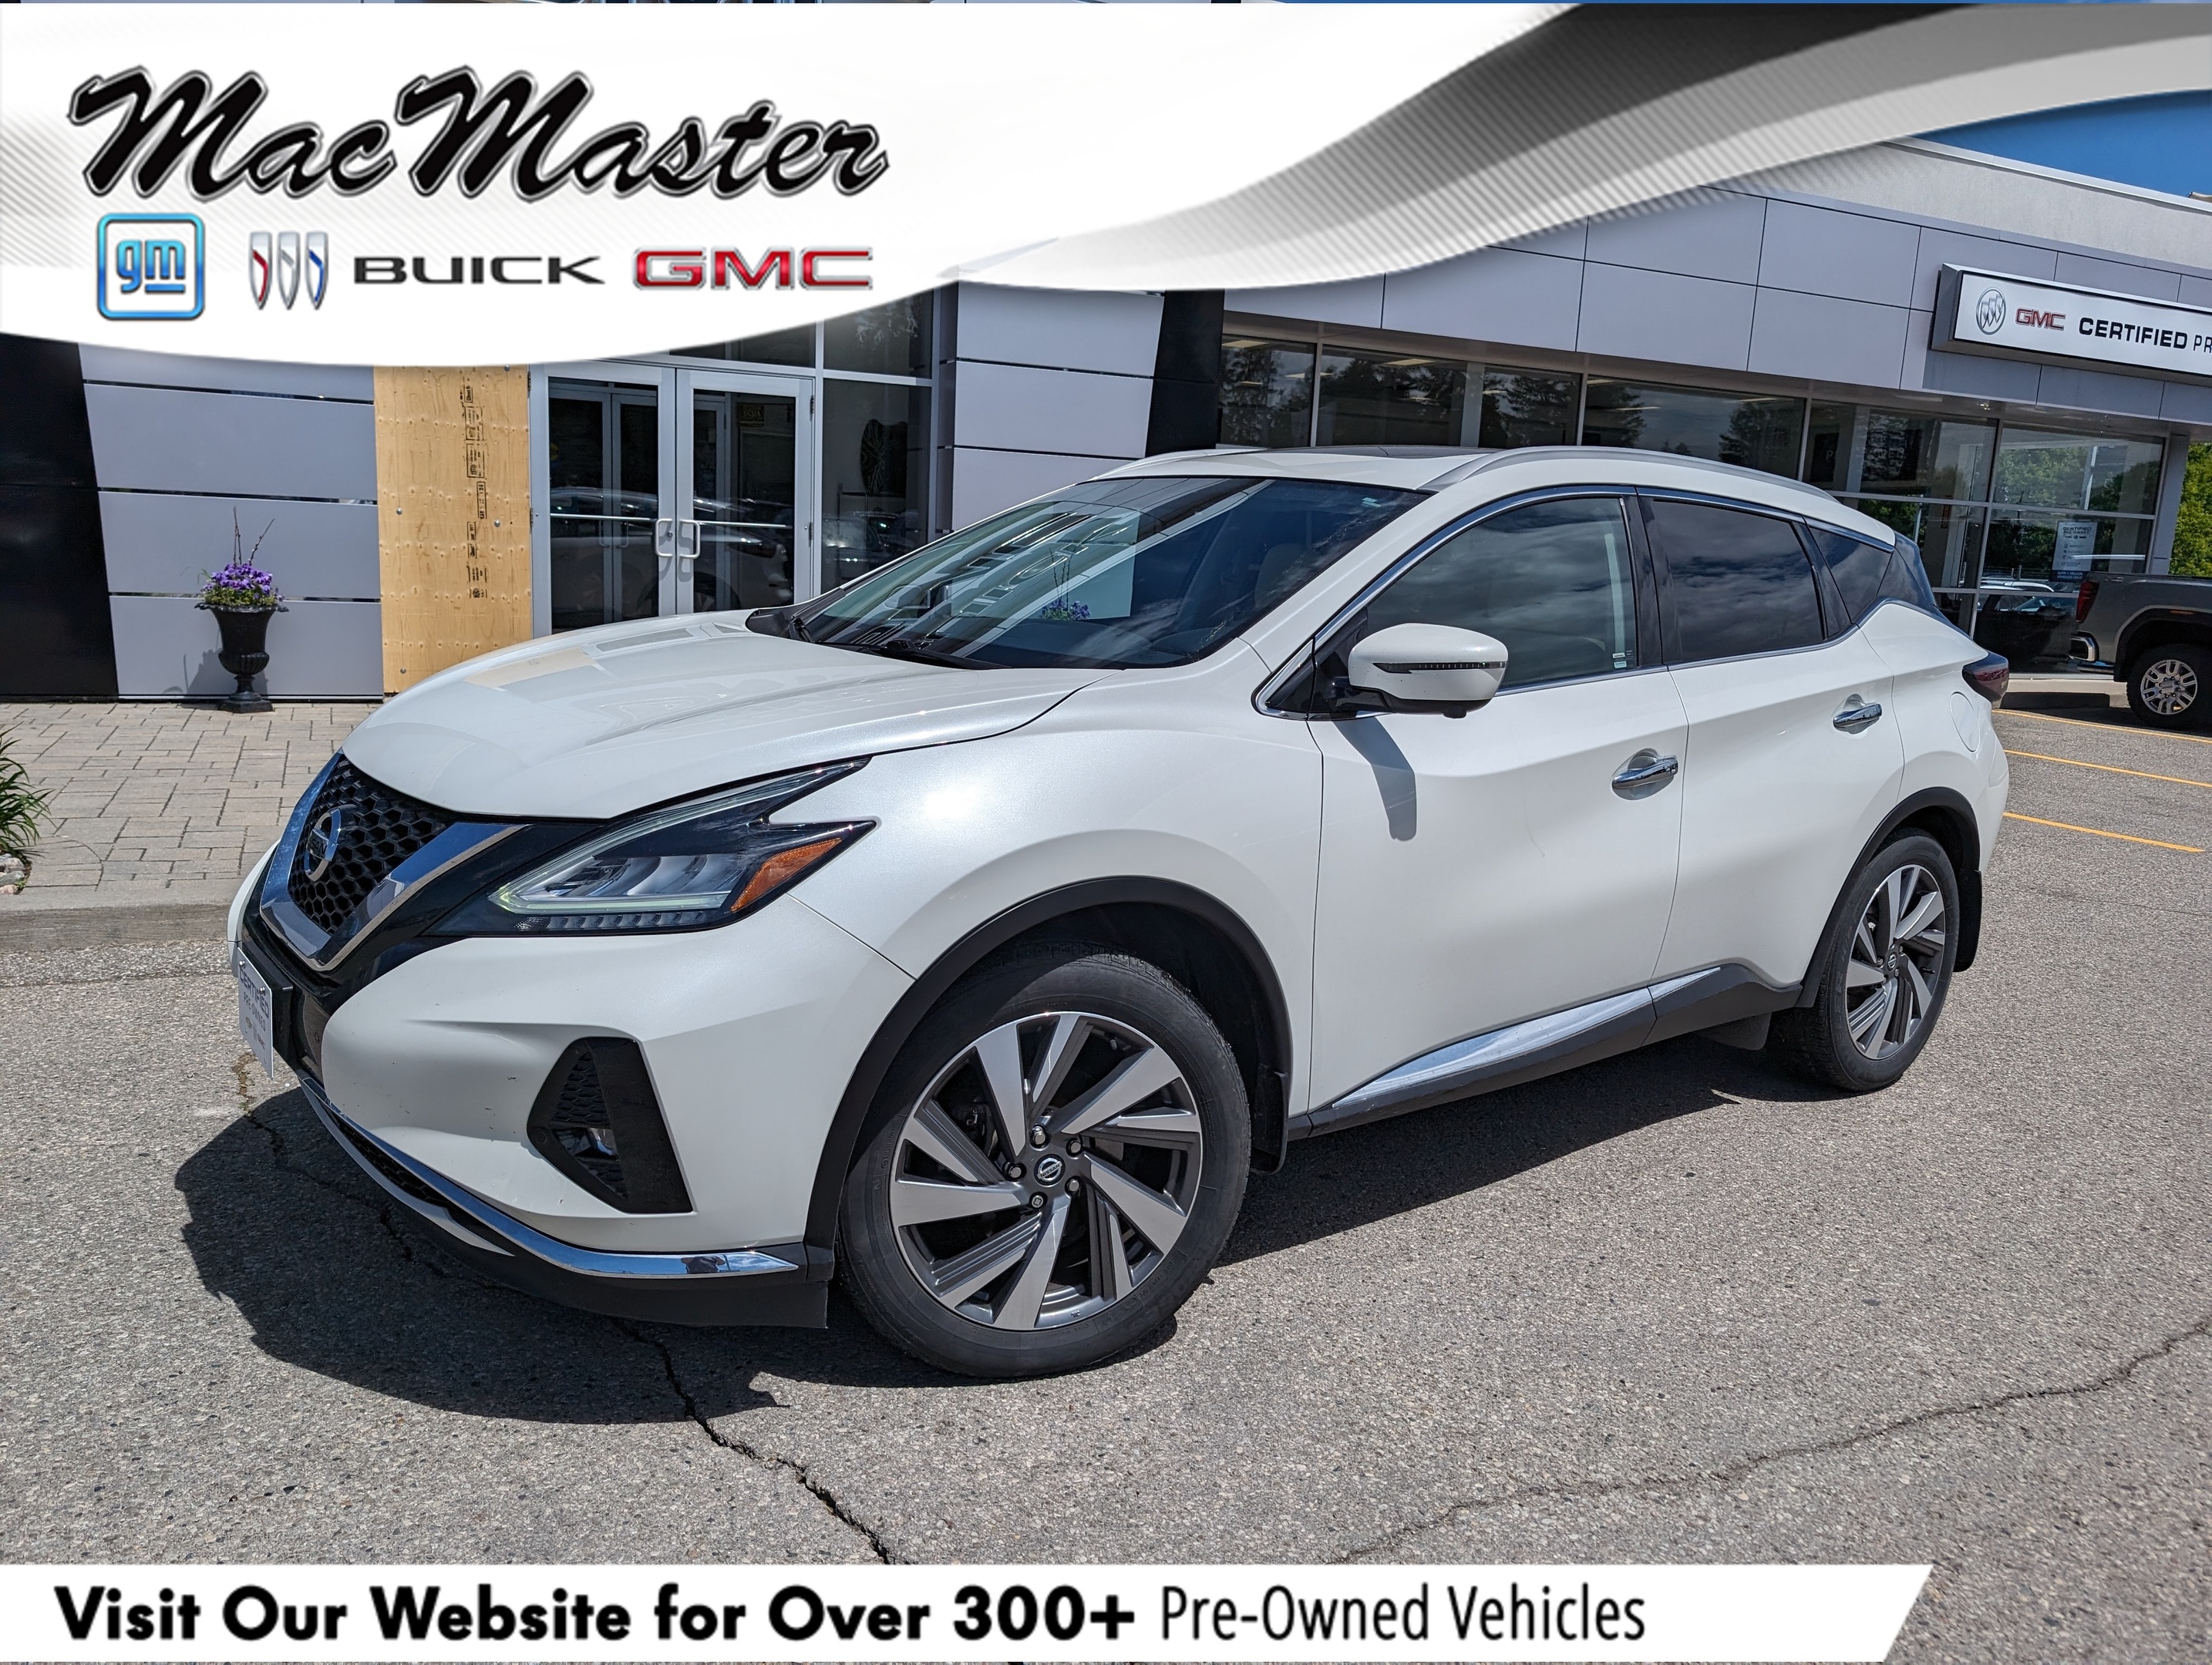 2019 Nissan Murano SL AWD, NAV, HEATED LEATHER, ROOF, BOSE, 1-OWNER!